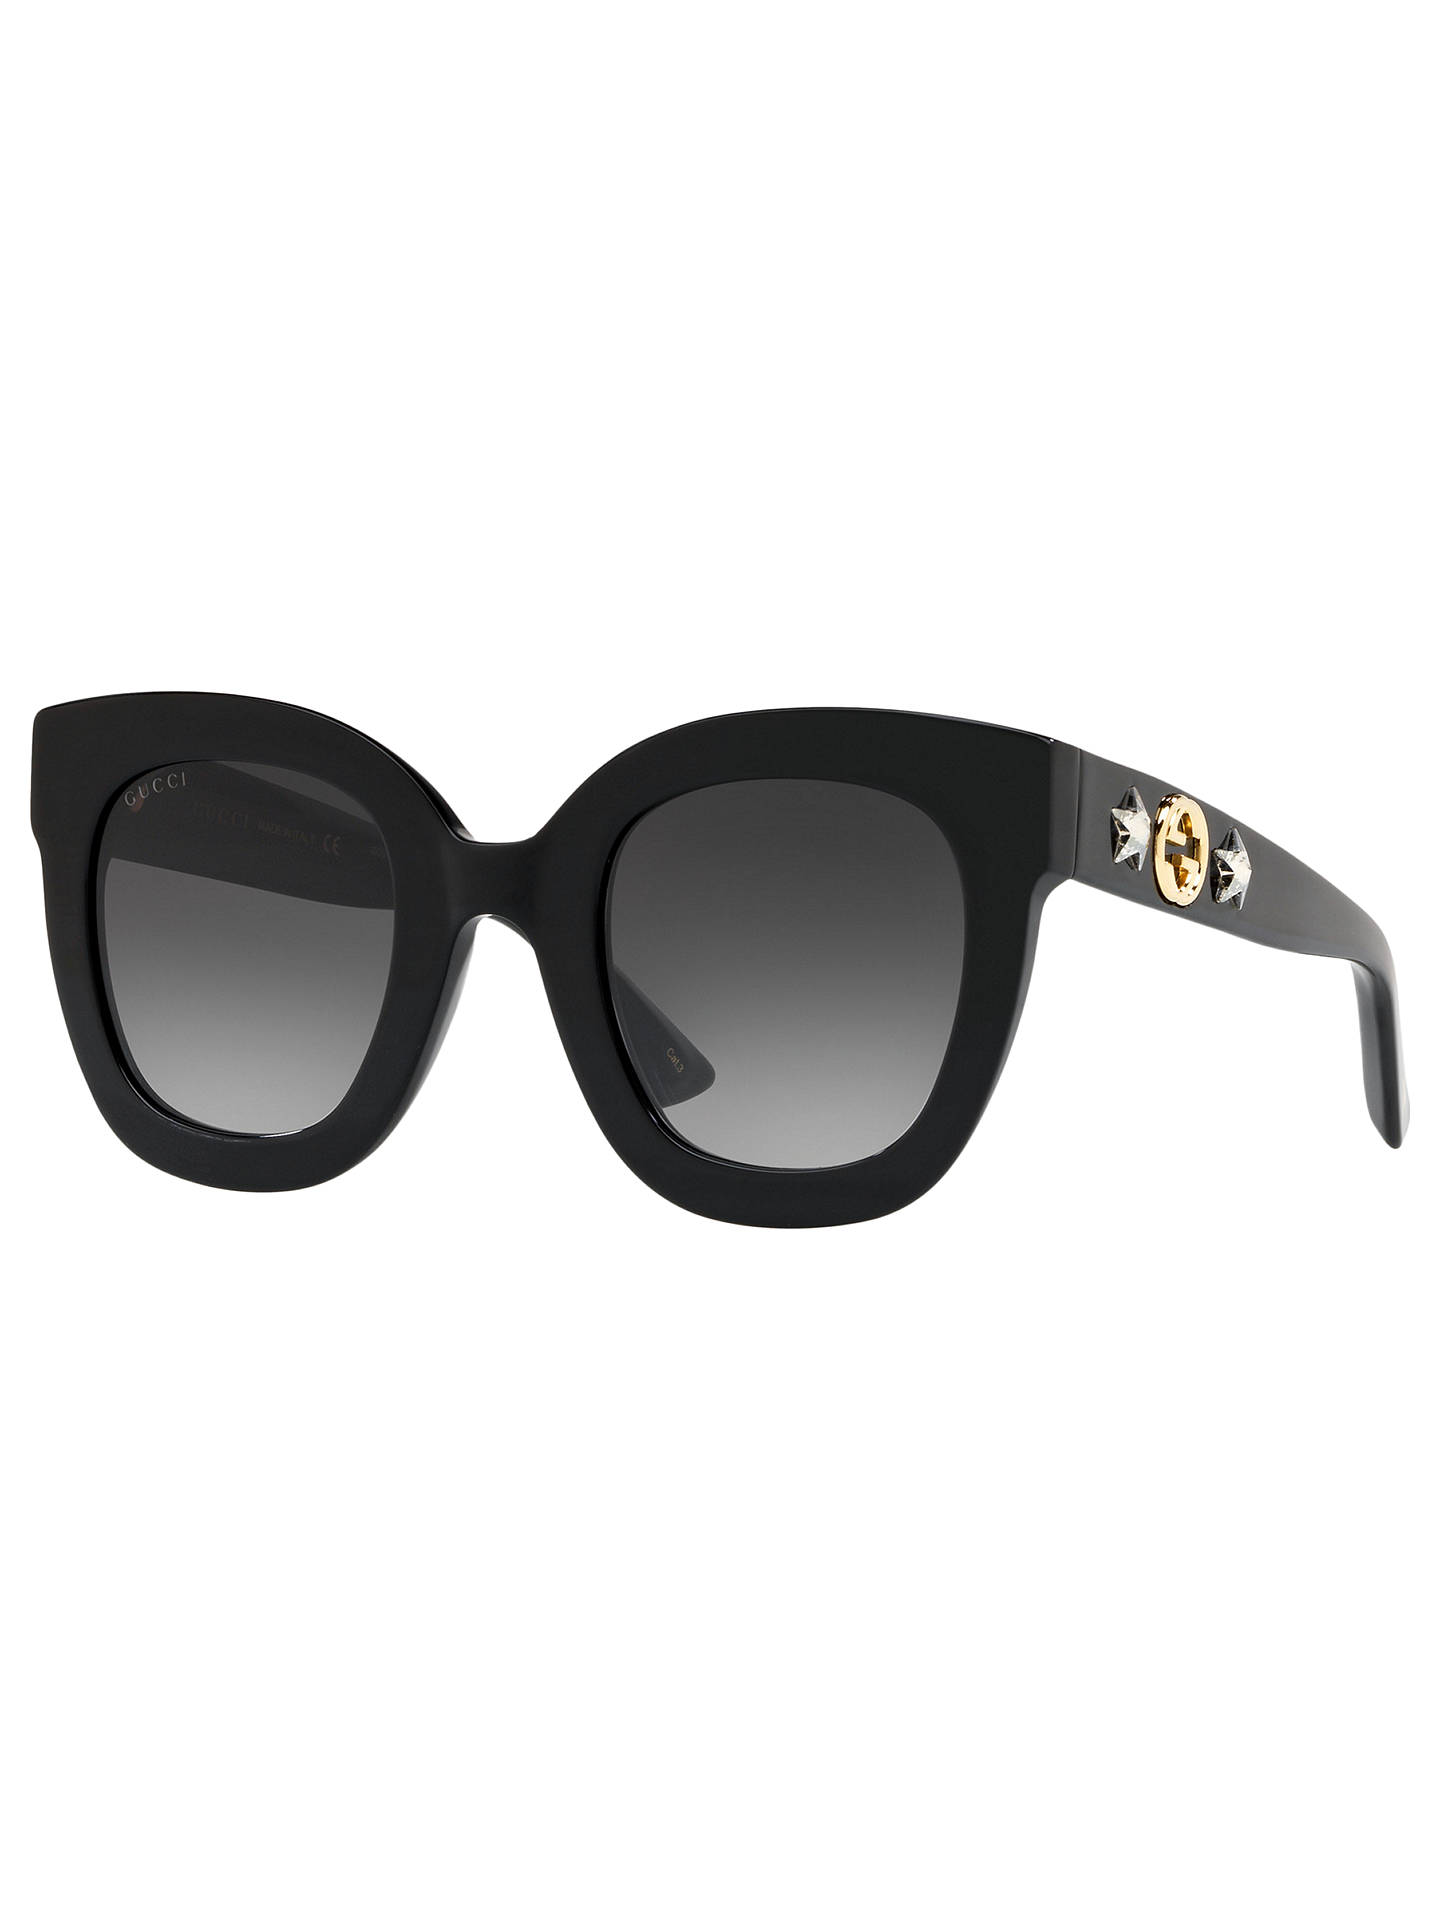 Gucci GG0208S Statement Oval Sunglasses at John Lewis & Partners